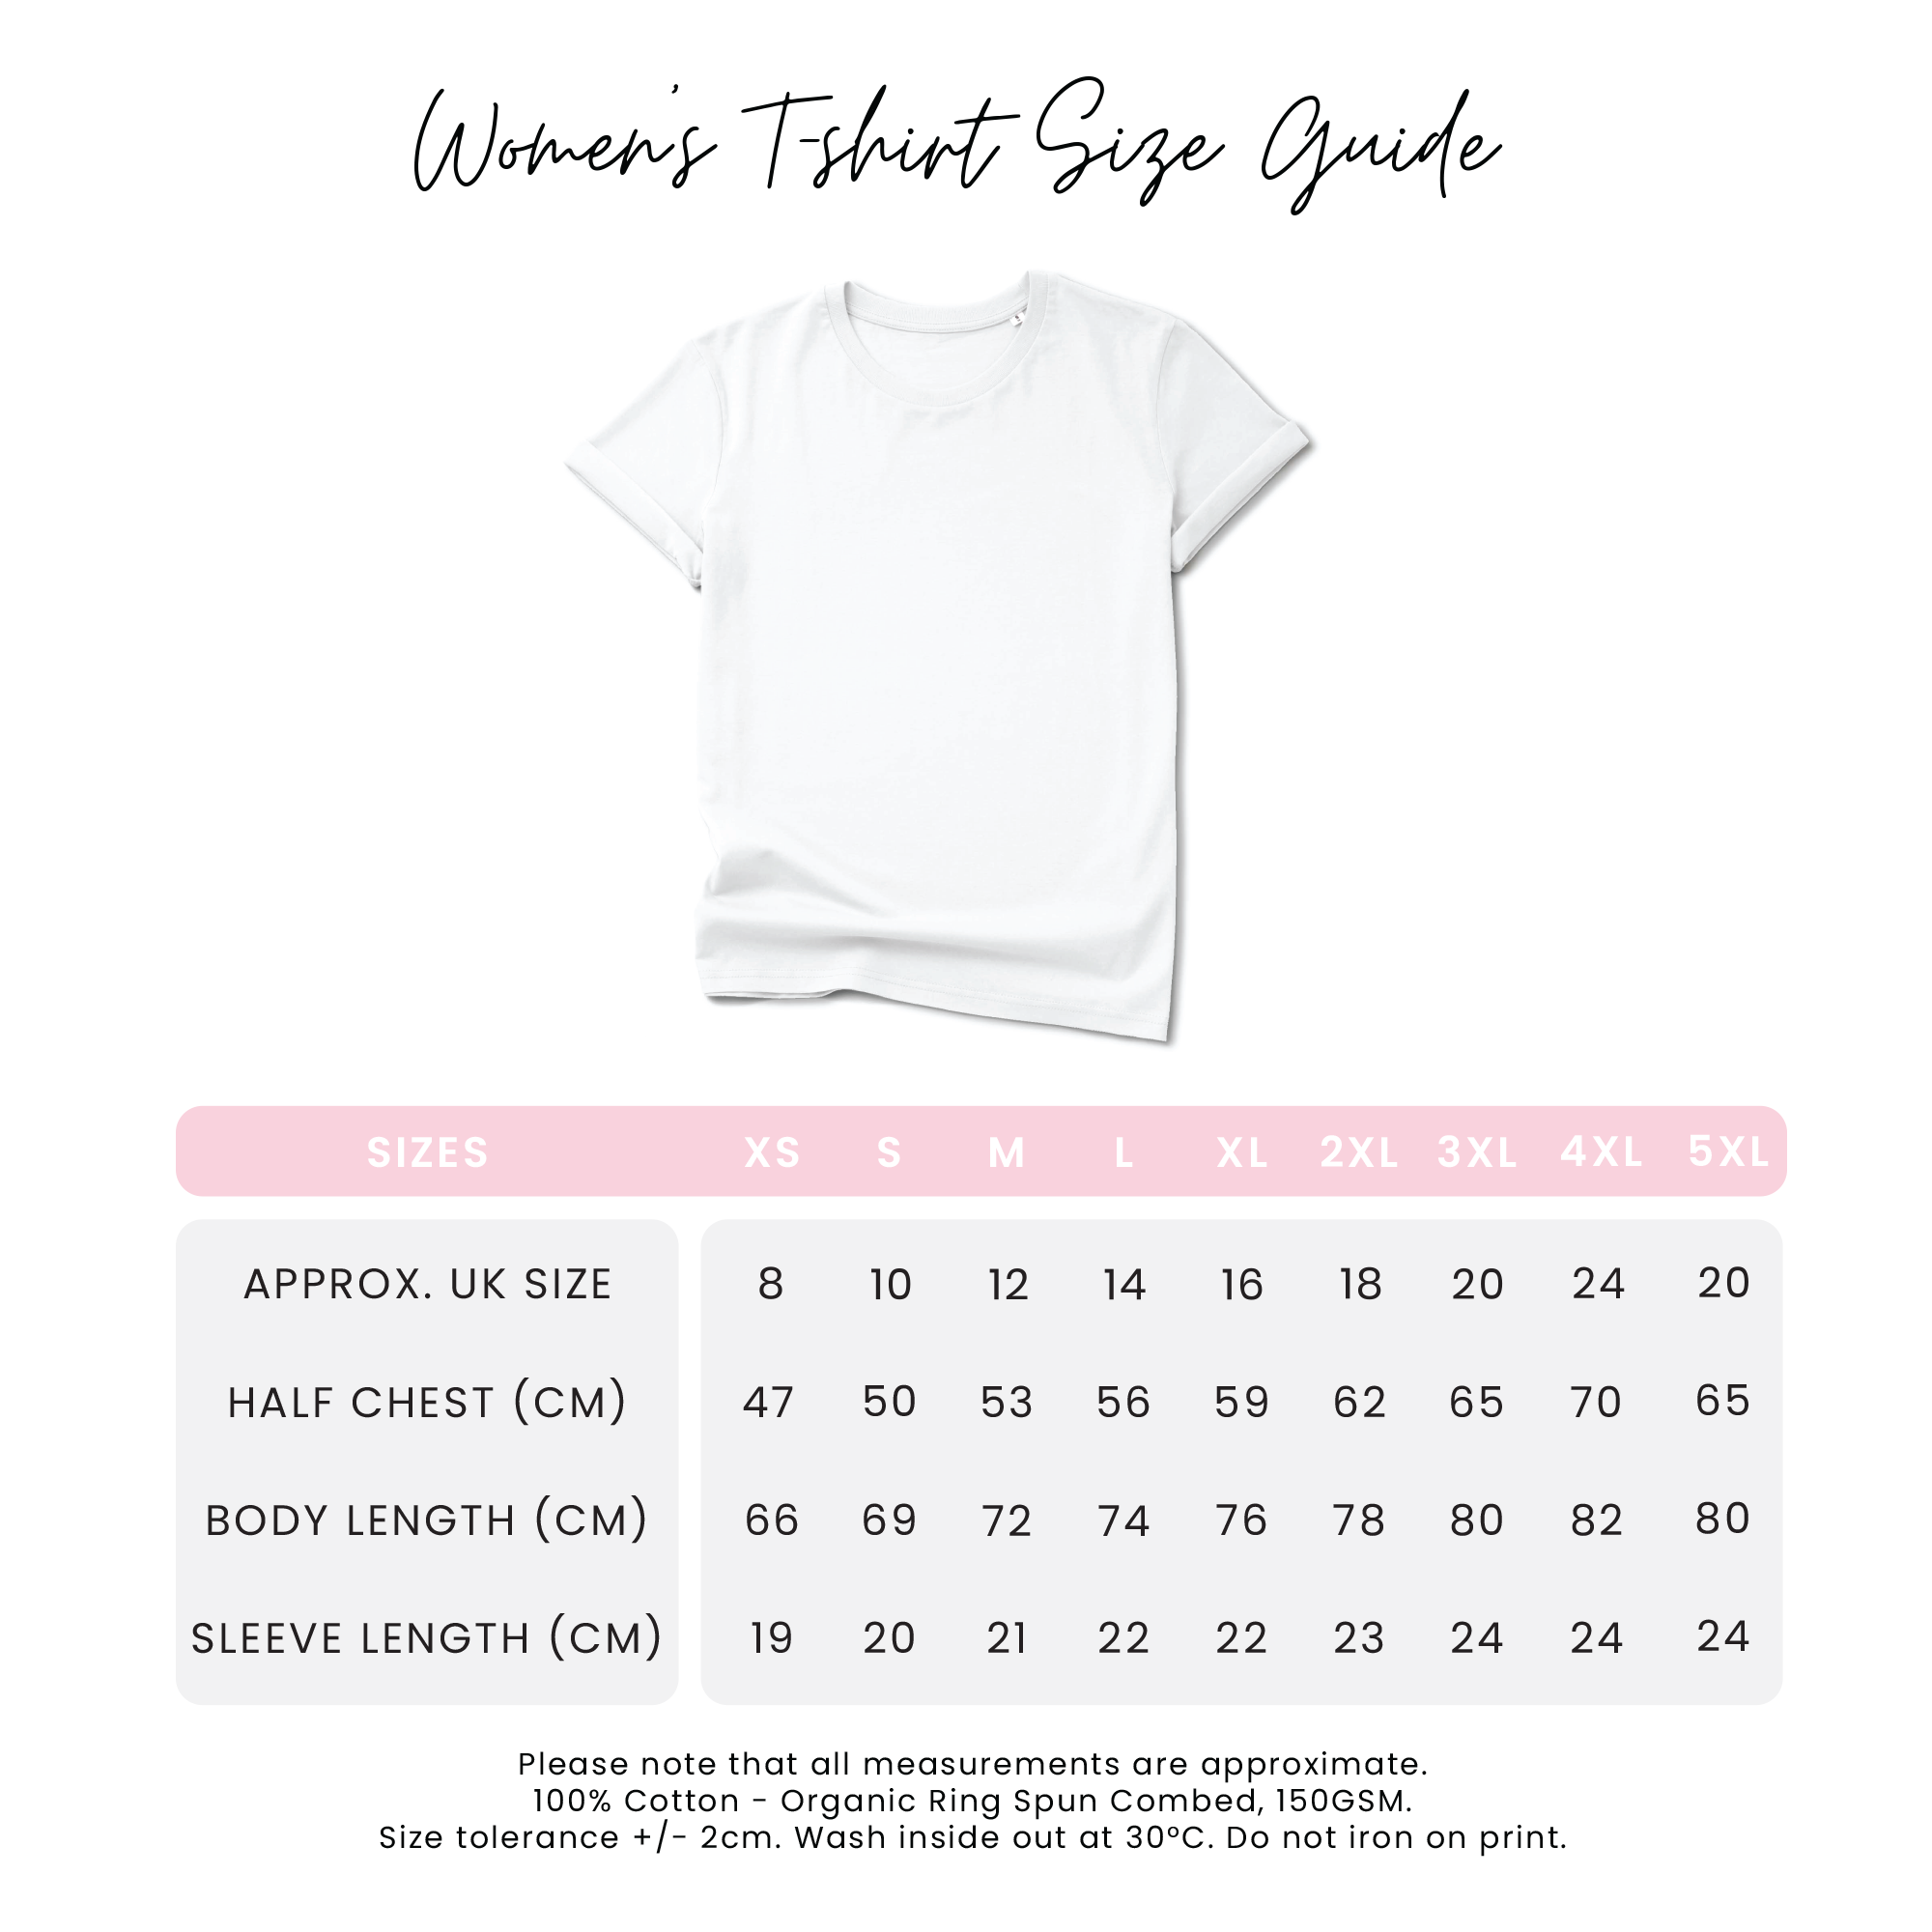 Feyonce Hen Party T-Shirt